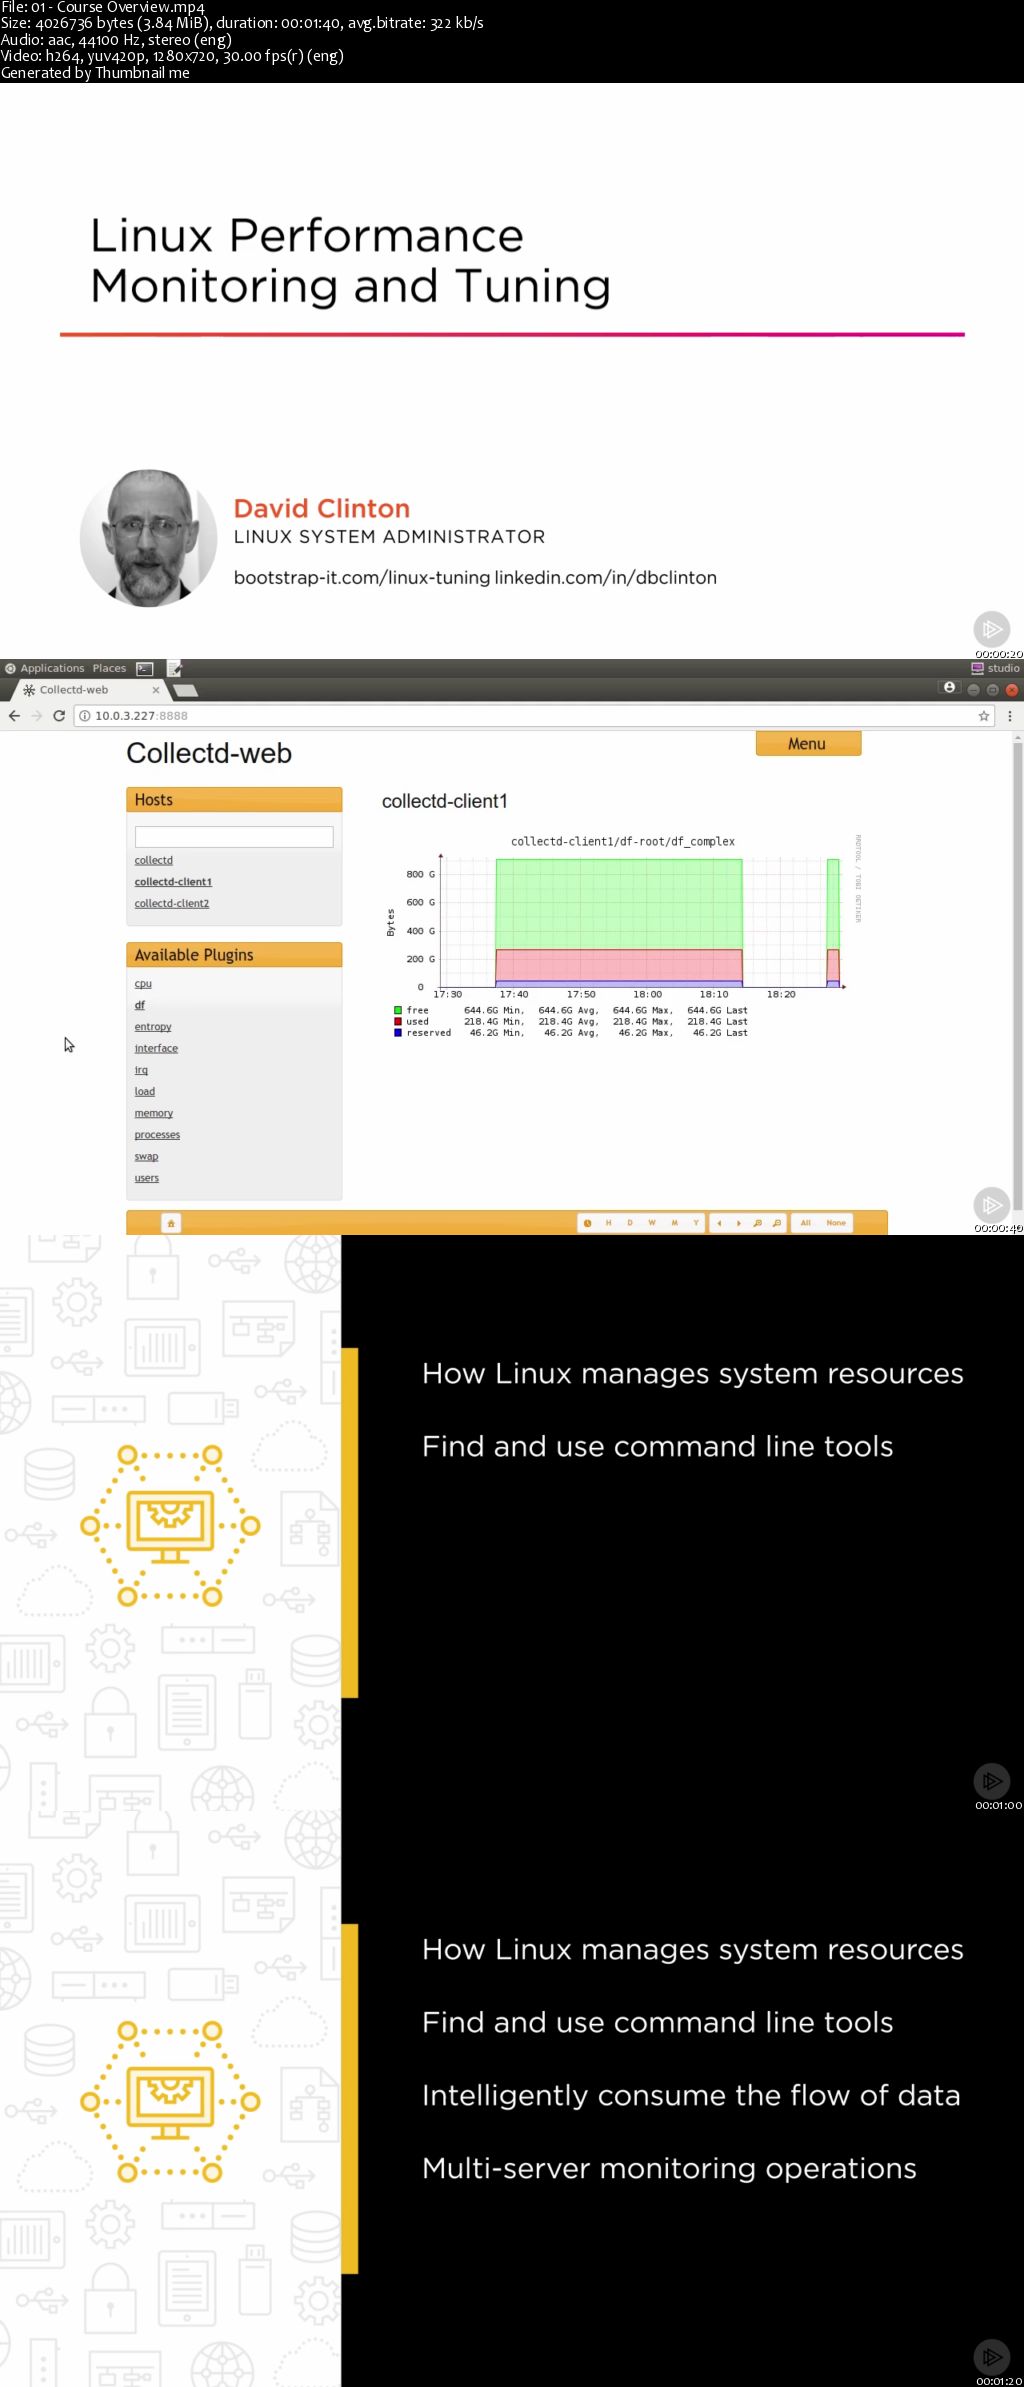 Linux Performance Monitoring and Tuning